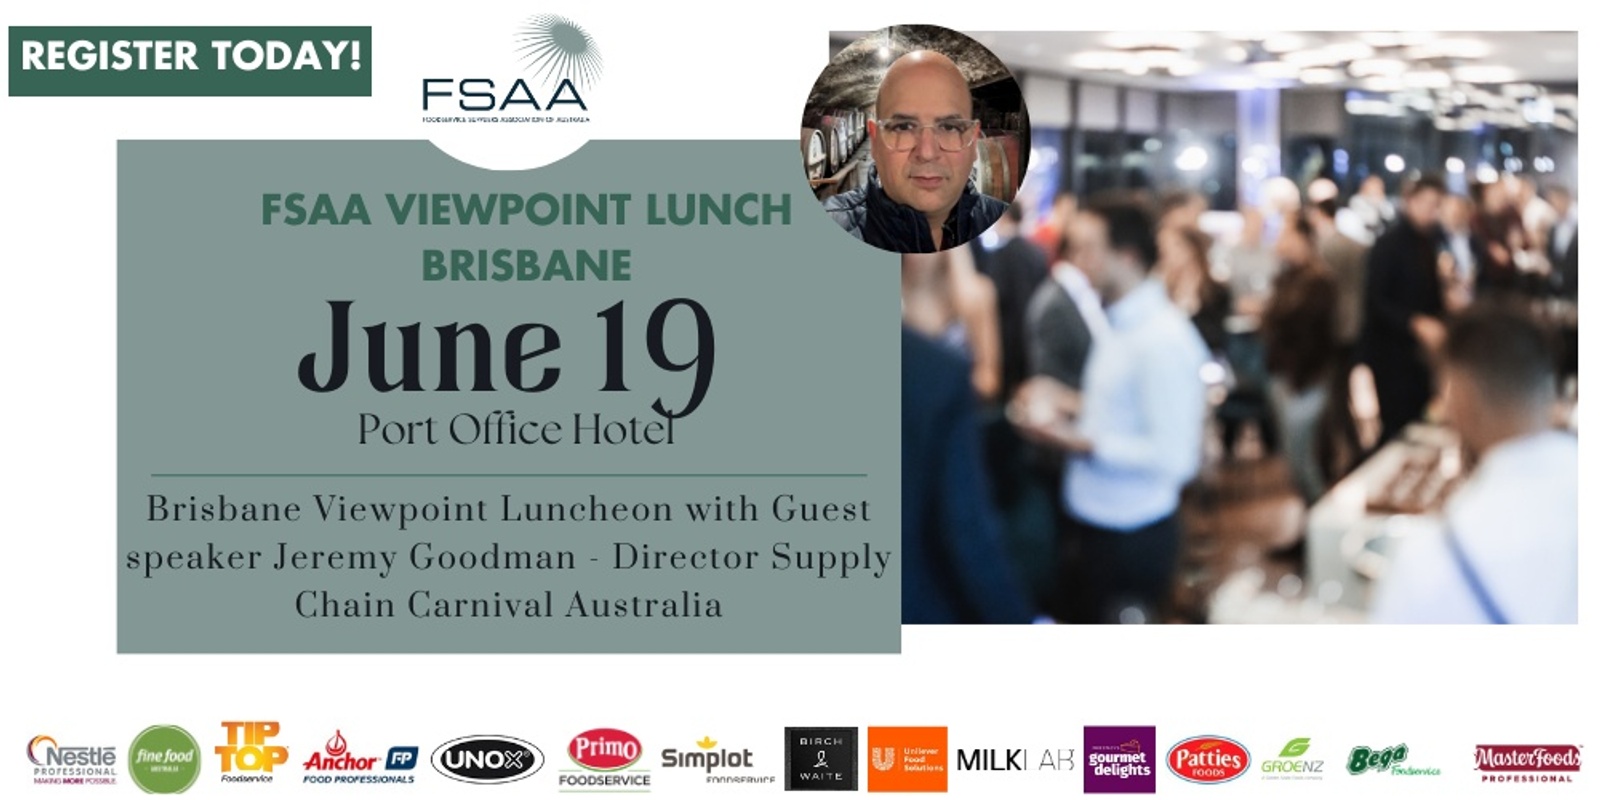 Banner image for FSAA Viewpoint Lunch Brisbane